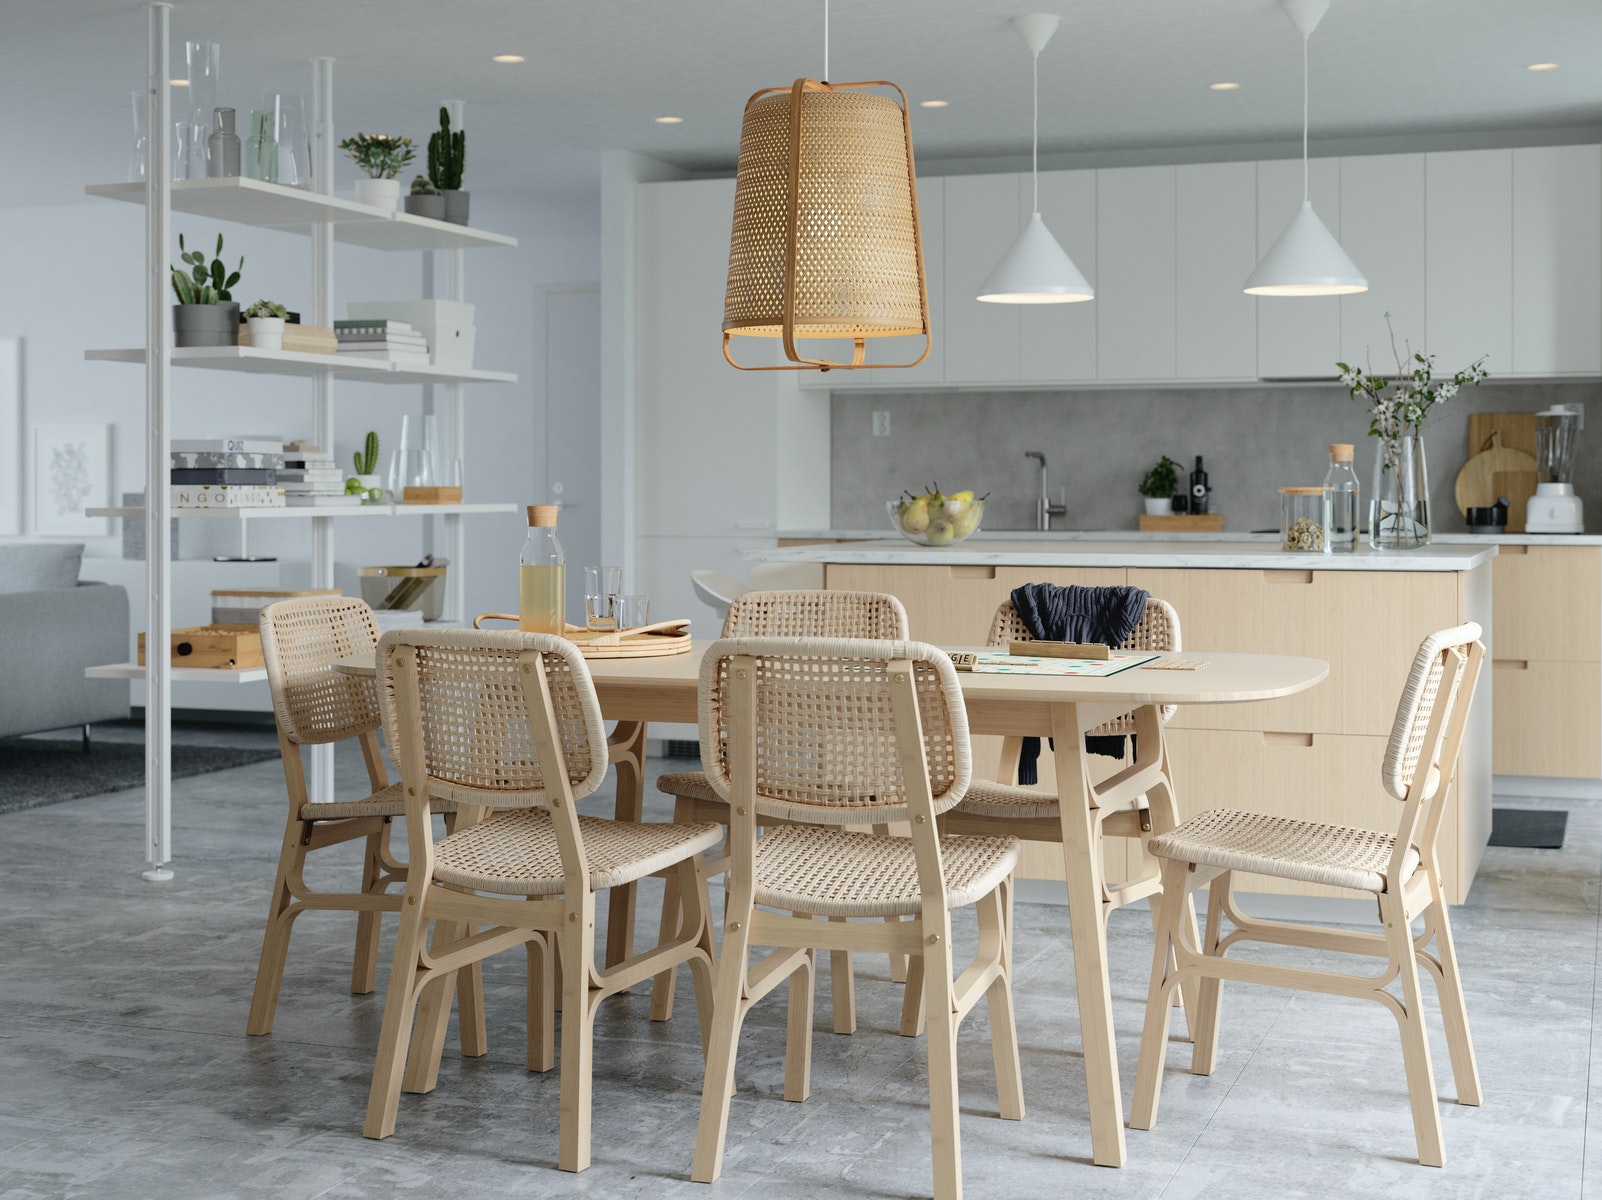 IKEA - A light and airy dining area for spending time together